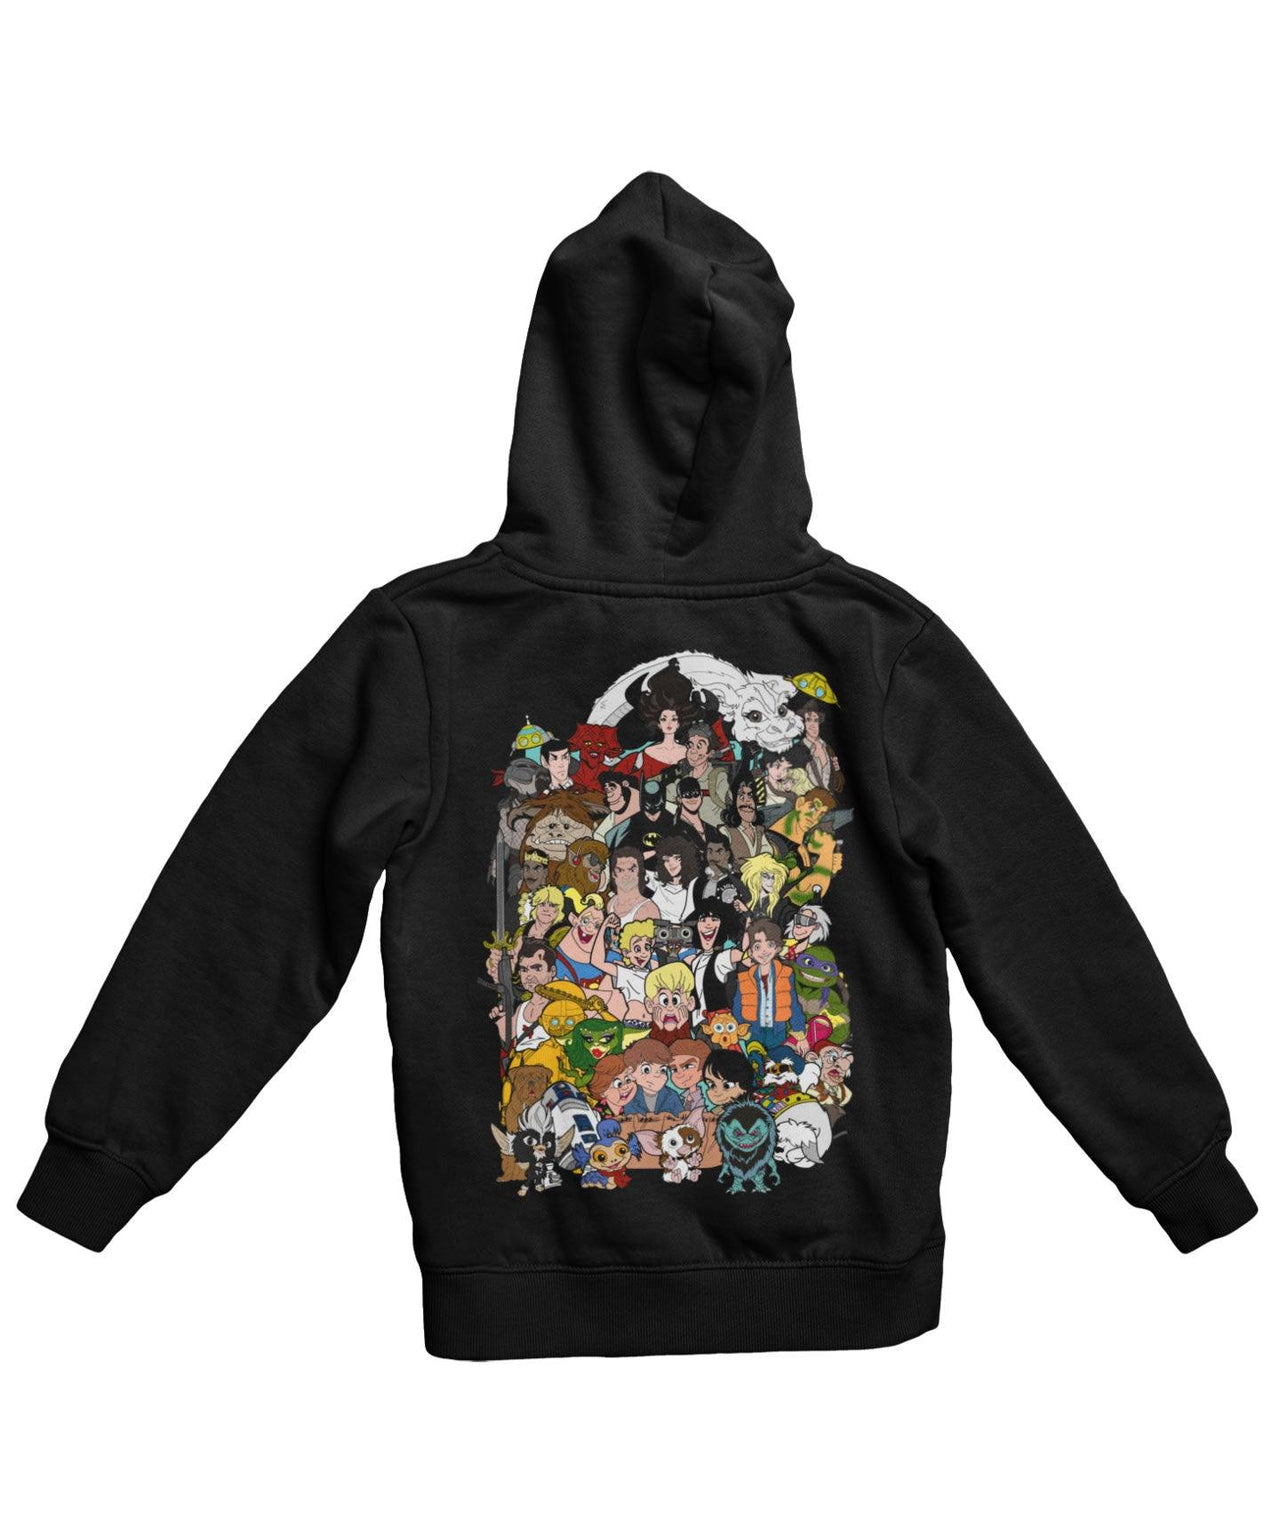 Top Notchy Made of Movies Back Printed Hoodie For Men and Women 8Ball